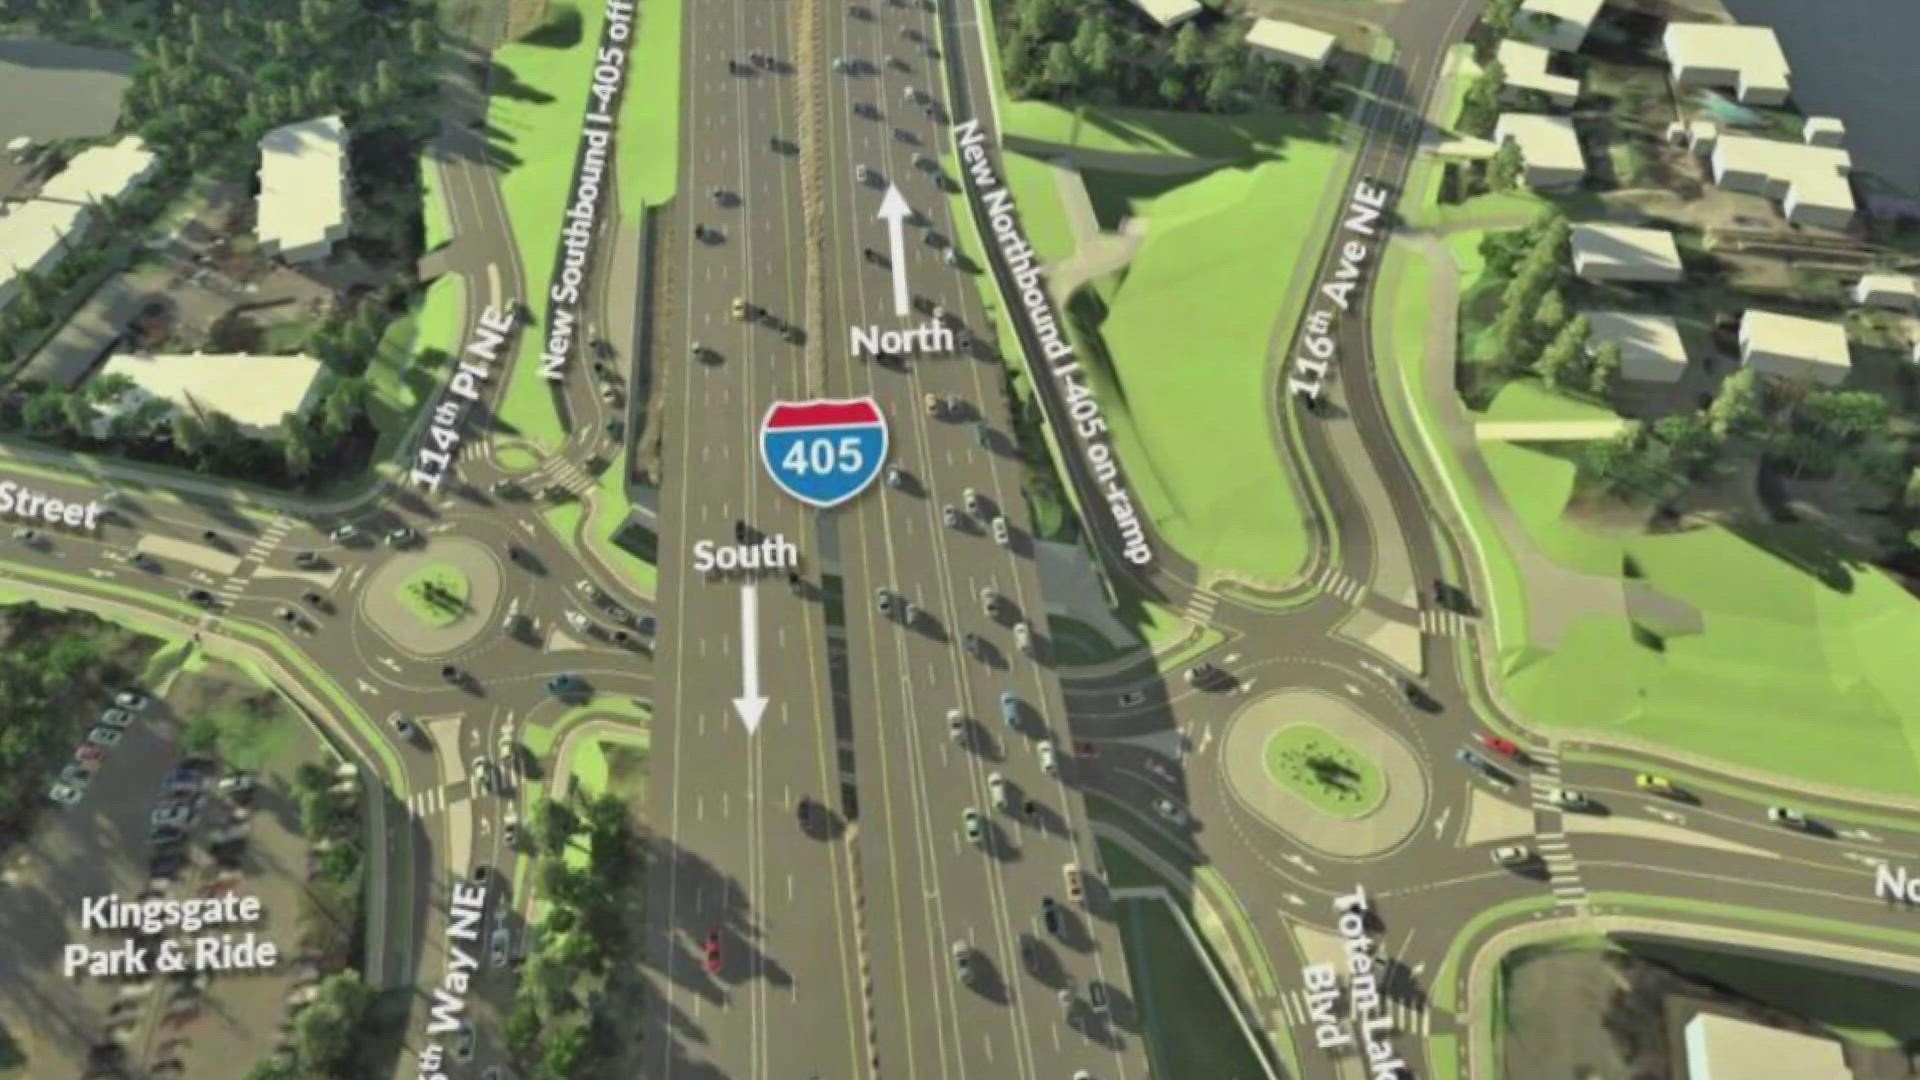 When completed, drivers will have the option to access I-405 at Northeast 132nd Street in Kirkland instead of using more heavily congested options.